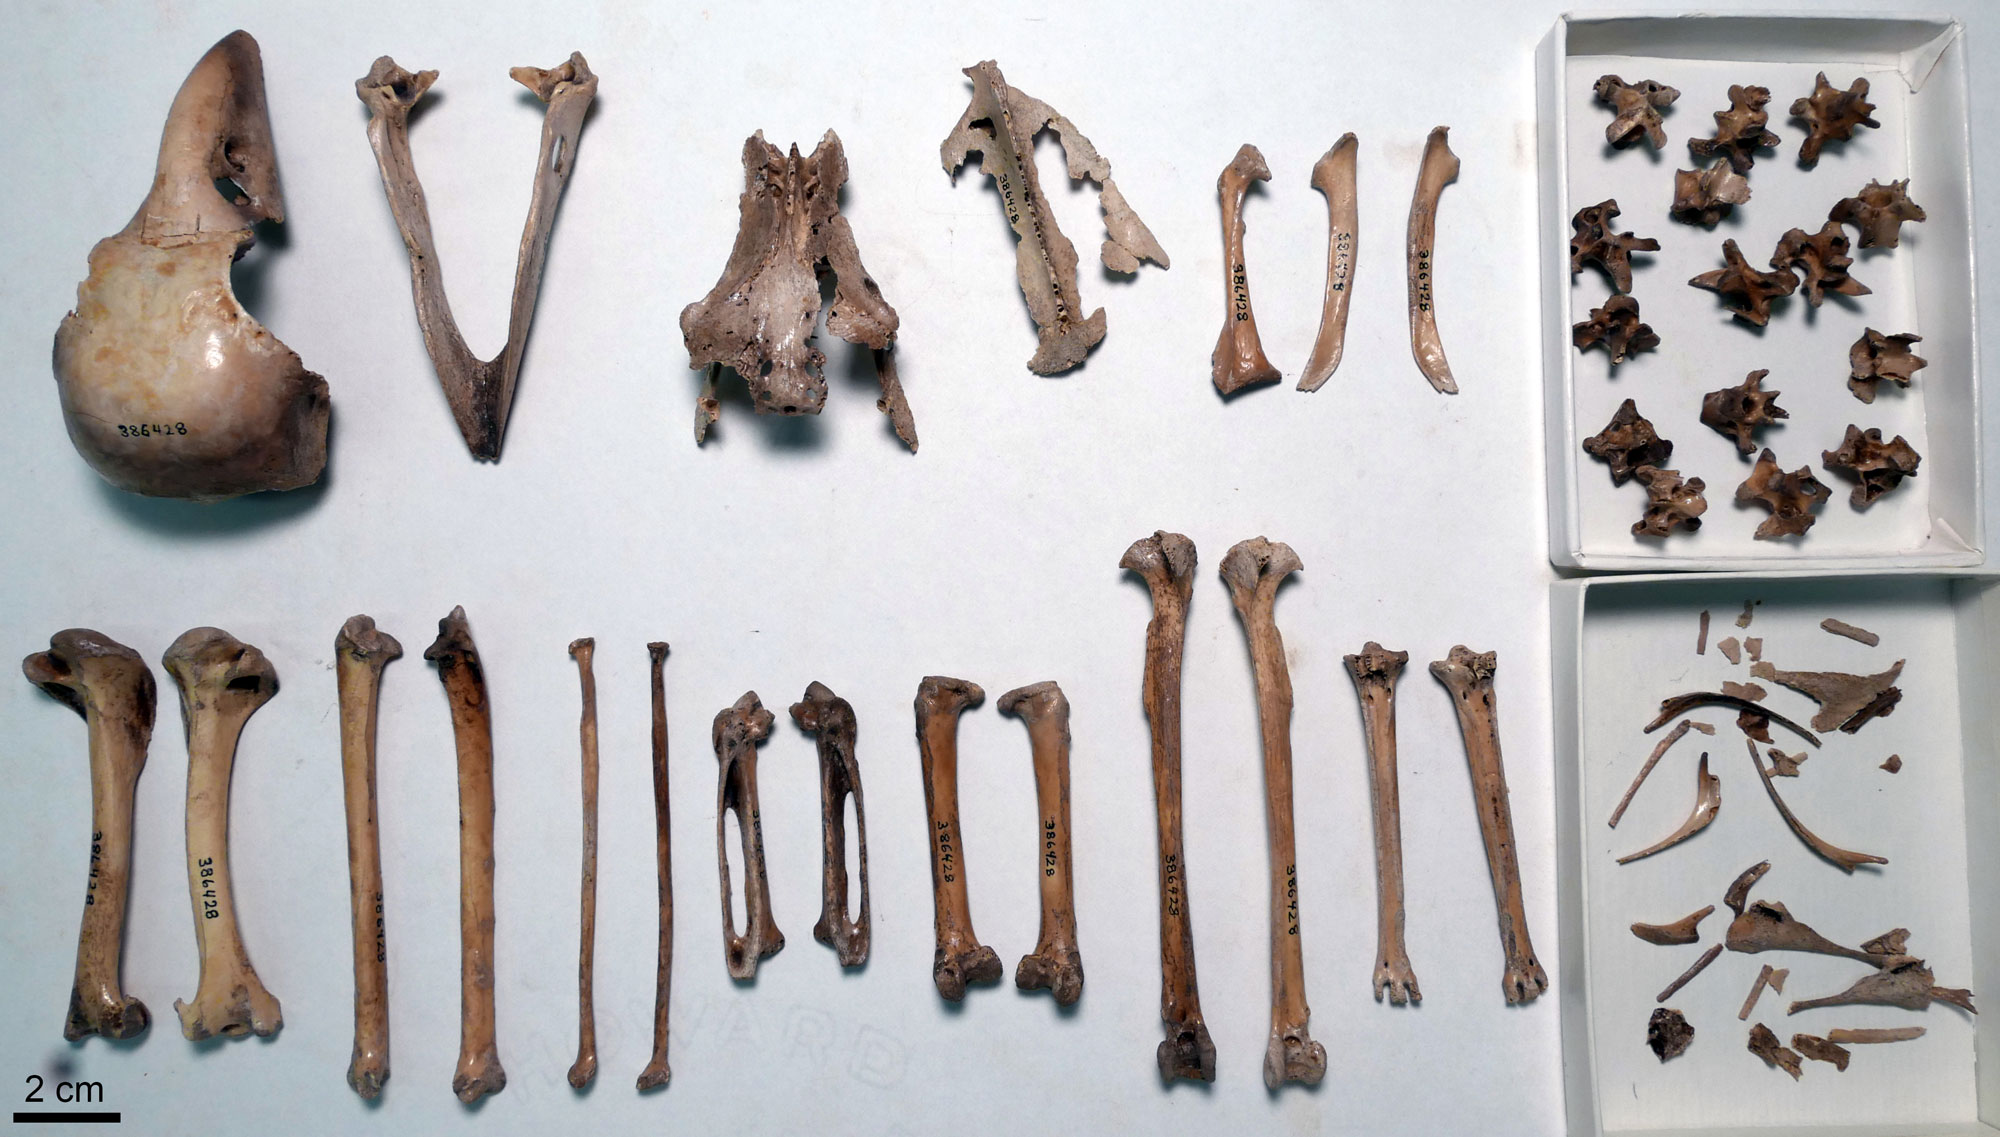 Photograph of subfossil bones of the high-billed crow from Oahu. The bones are laying on a white surface, with two additional boxes containing white bones at the right of the image. Bones include skull and limb bones and a sternum. The boxes contain vertebrae and small bones, possibly ribs.